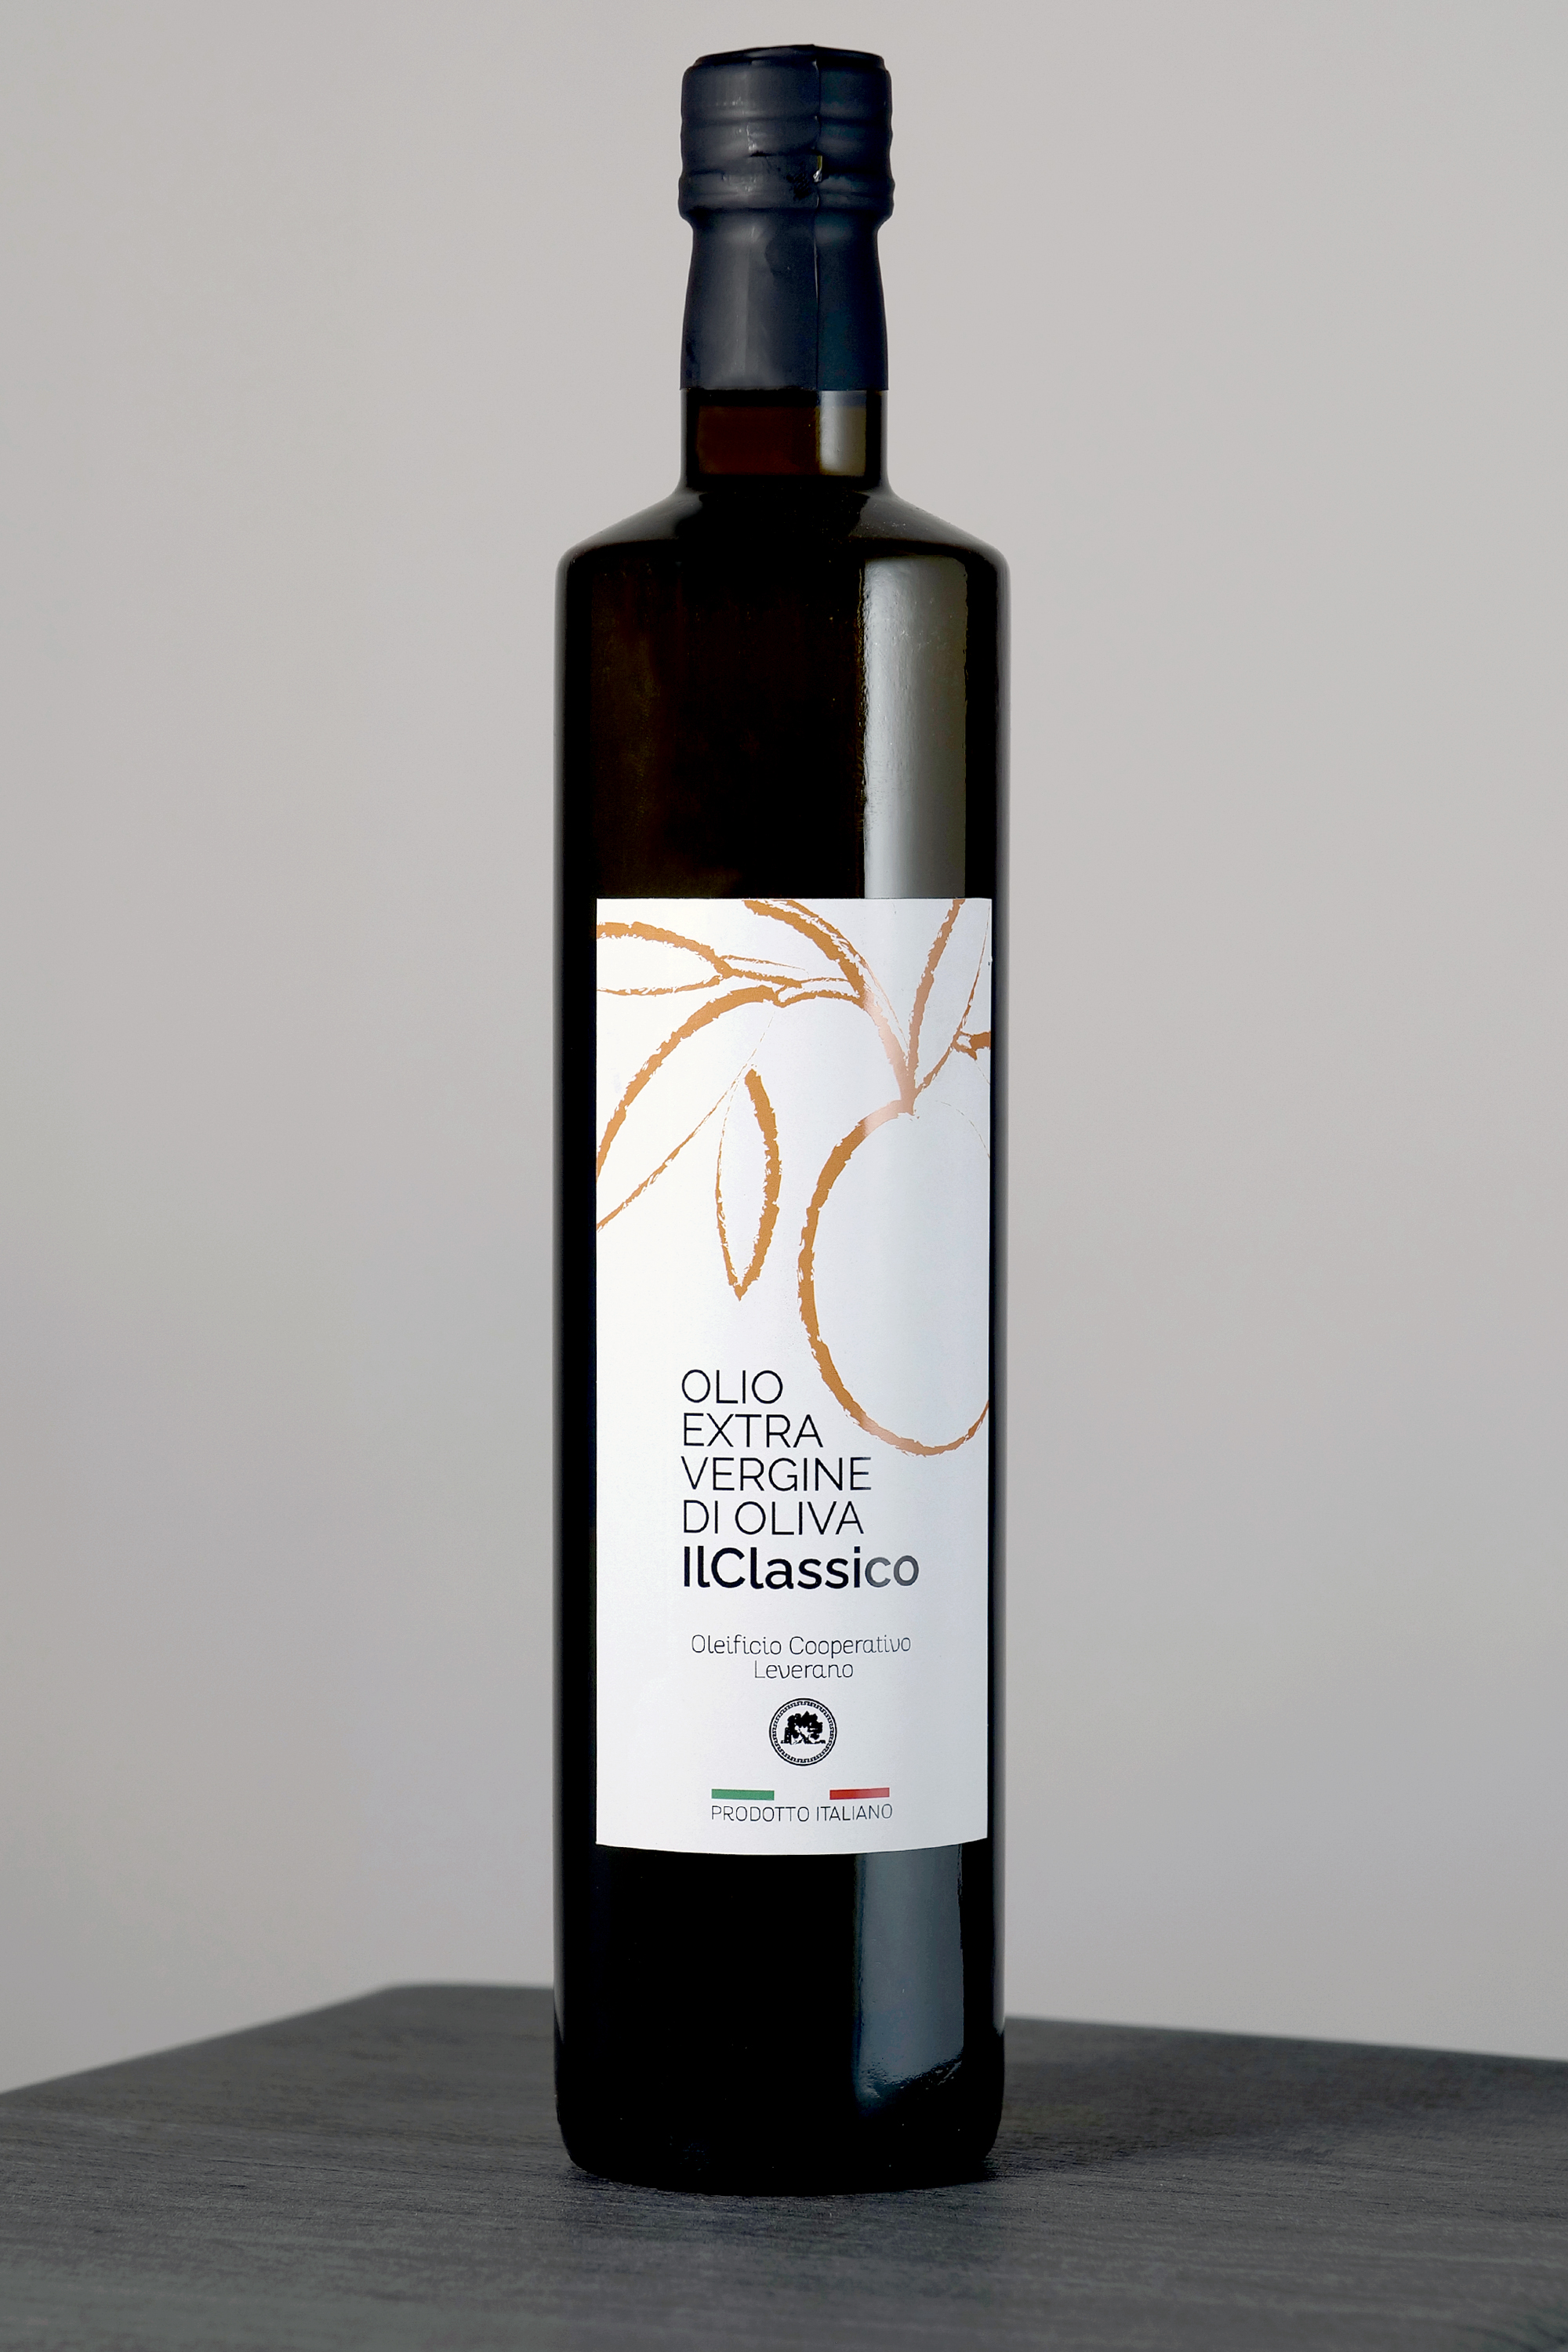 Extra virgin olive oil "IlClassico" - lt. 0,75